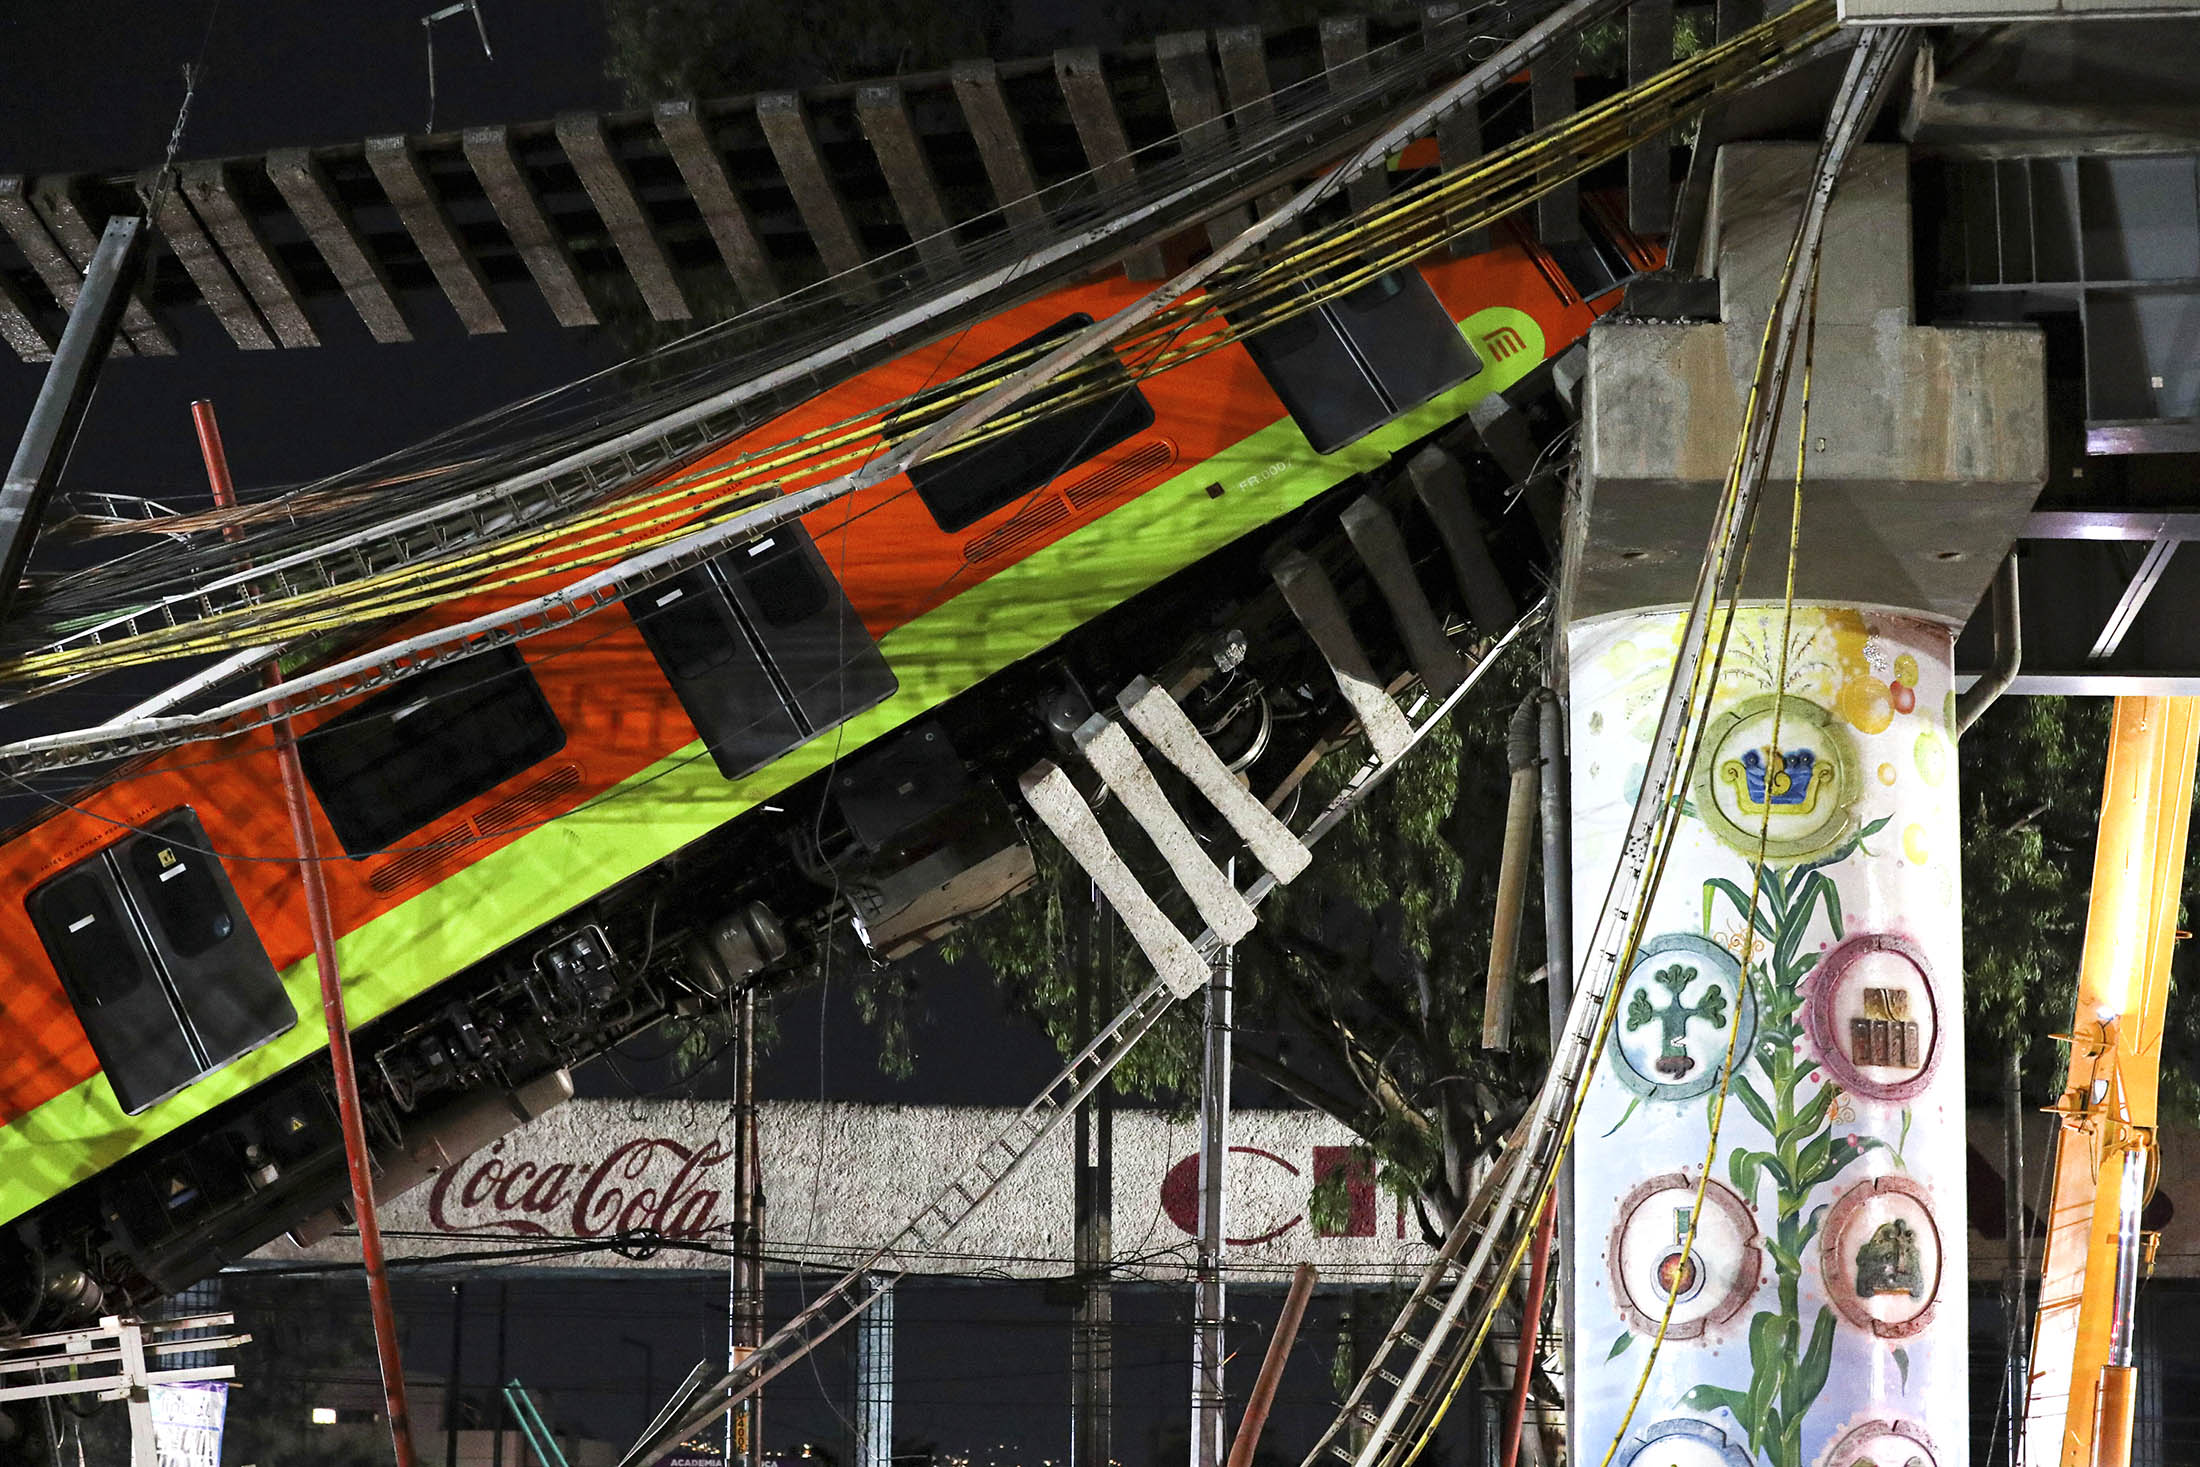 Train cars lay at an angle after a raised subway track collapsed in Mexico City.